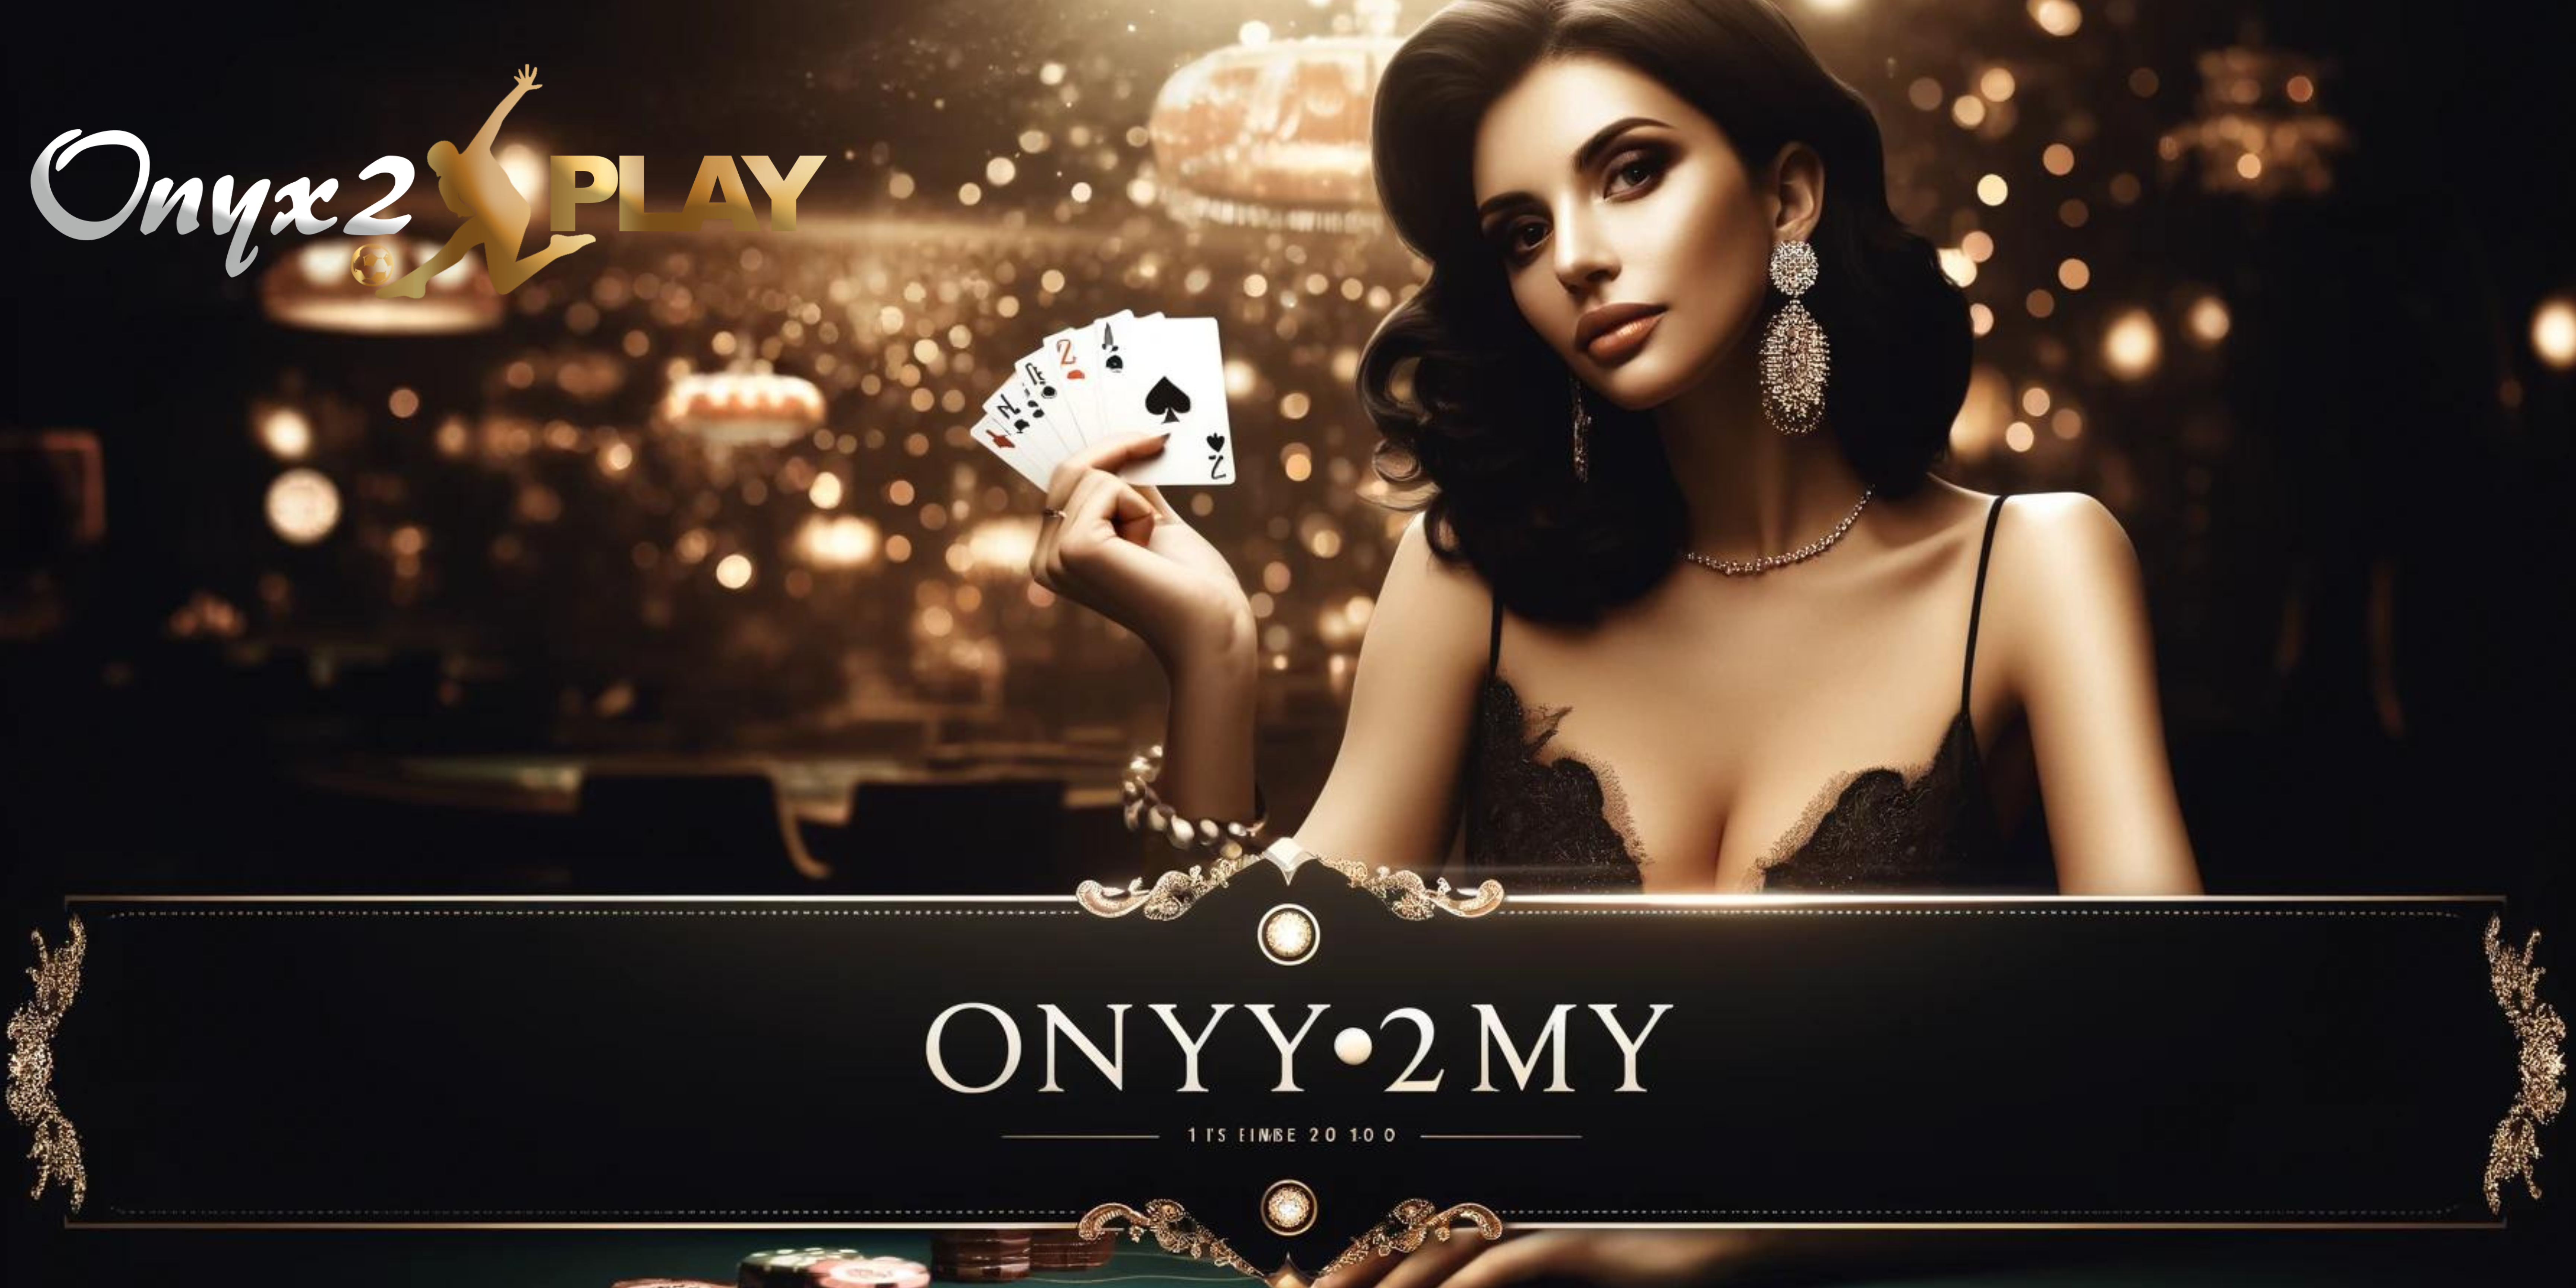 Play the Onyx2my Games on your Mobile Devices